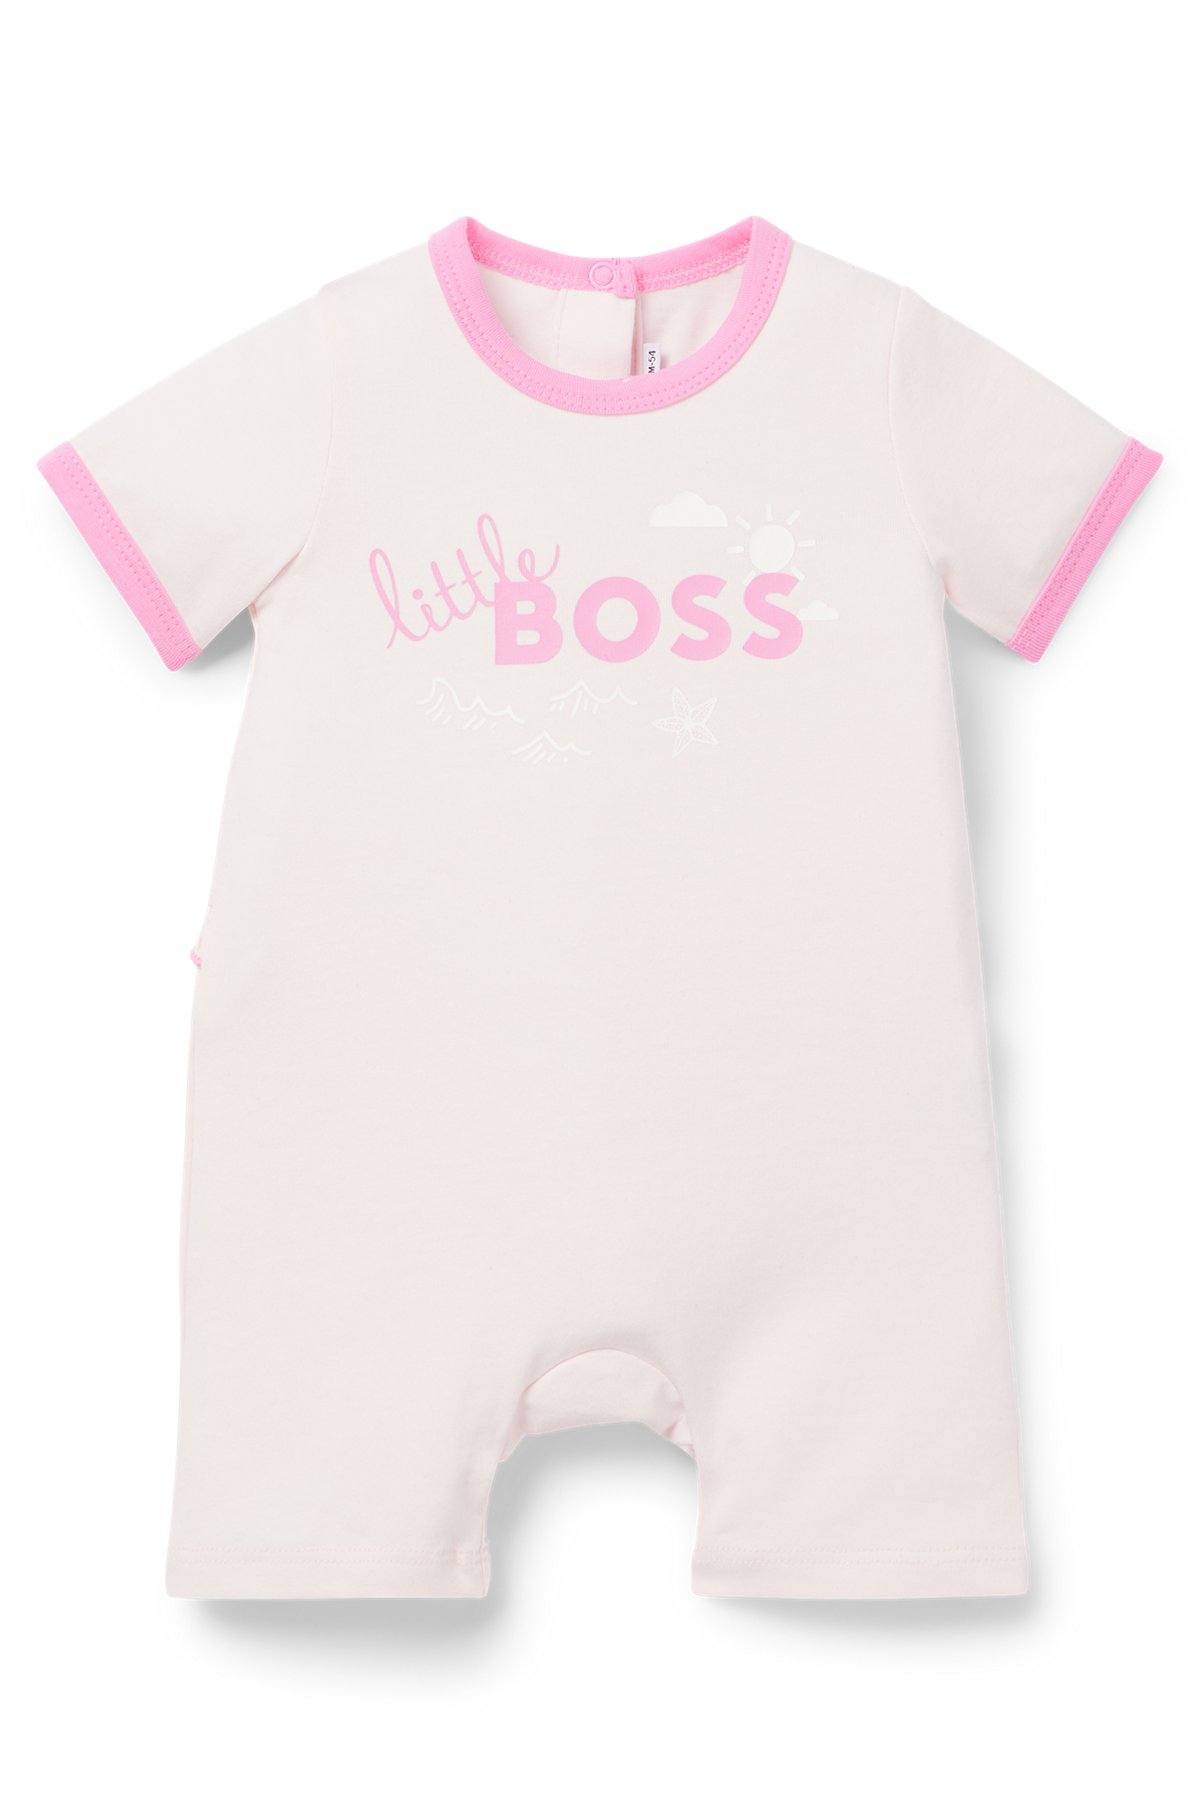 Baby playsuit in cotton with printed logo and artwork, light pink